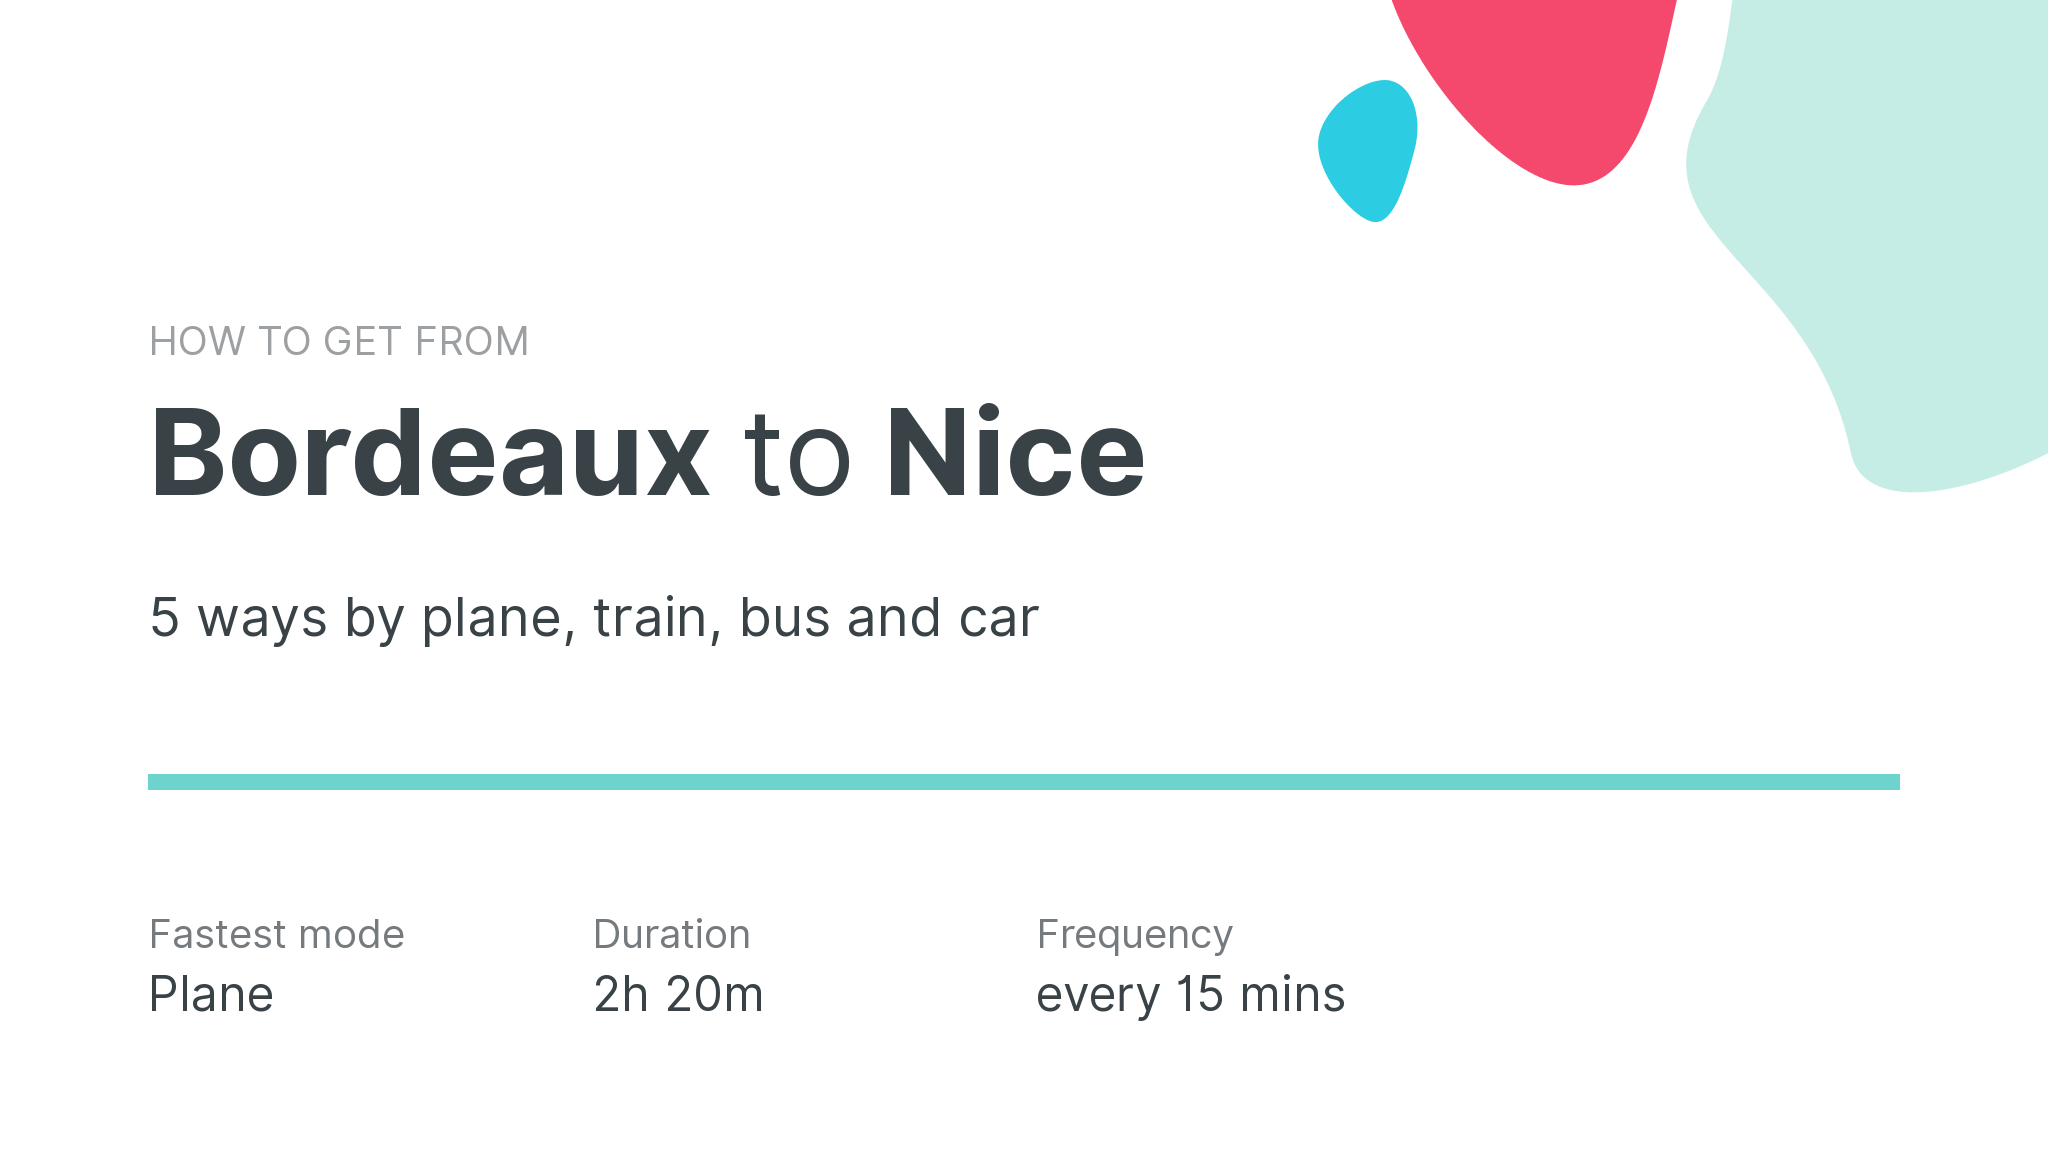 How do I get from Bordeaux to Nice